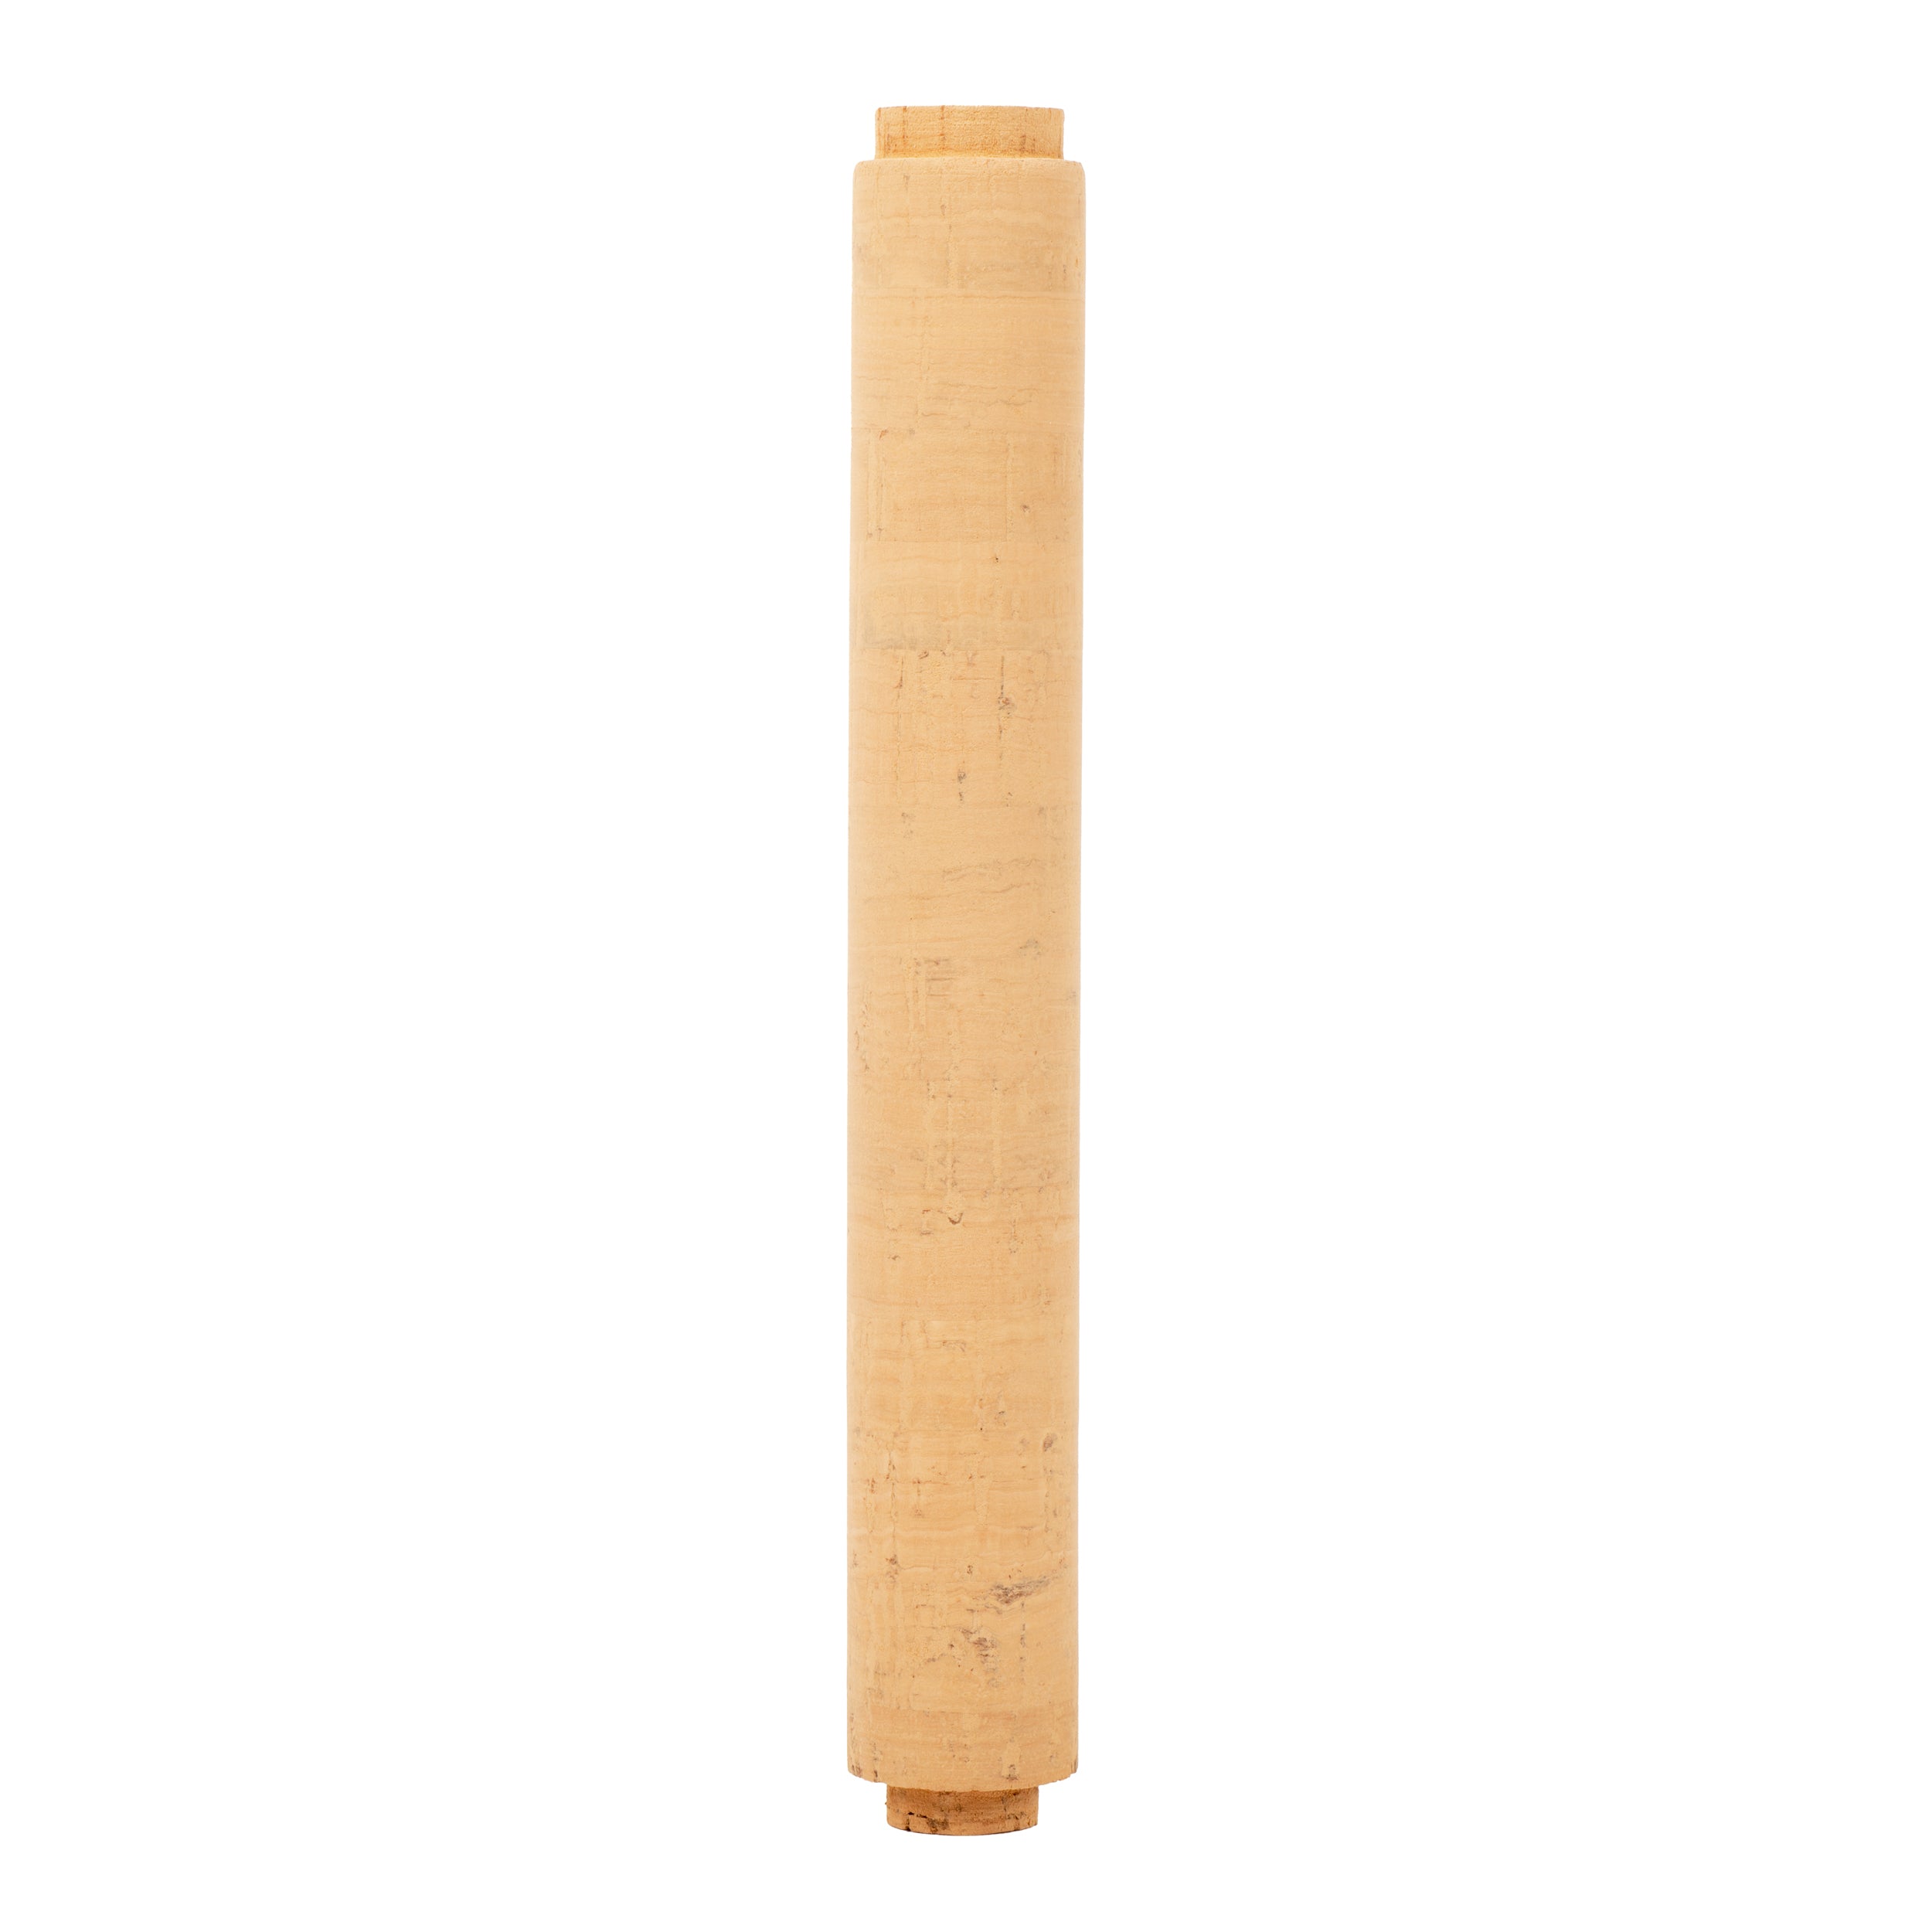 8" Cork Rear Grip for Casting Rods - 0.440" ID